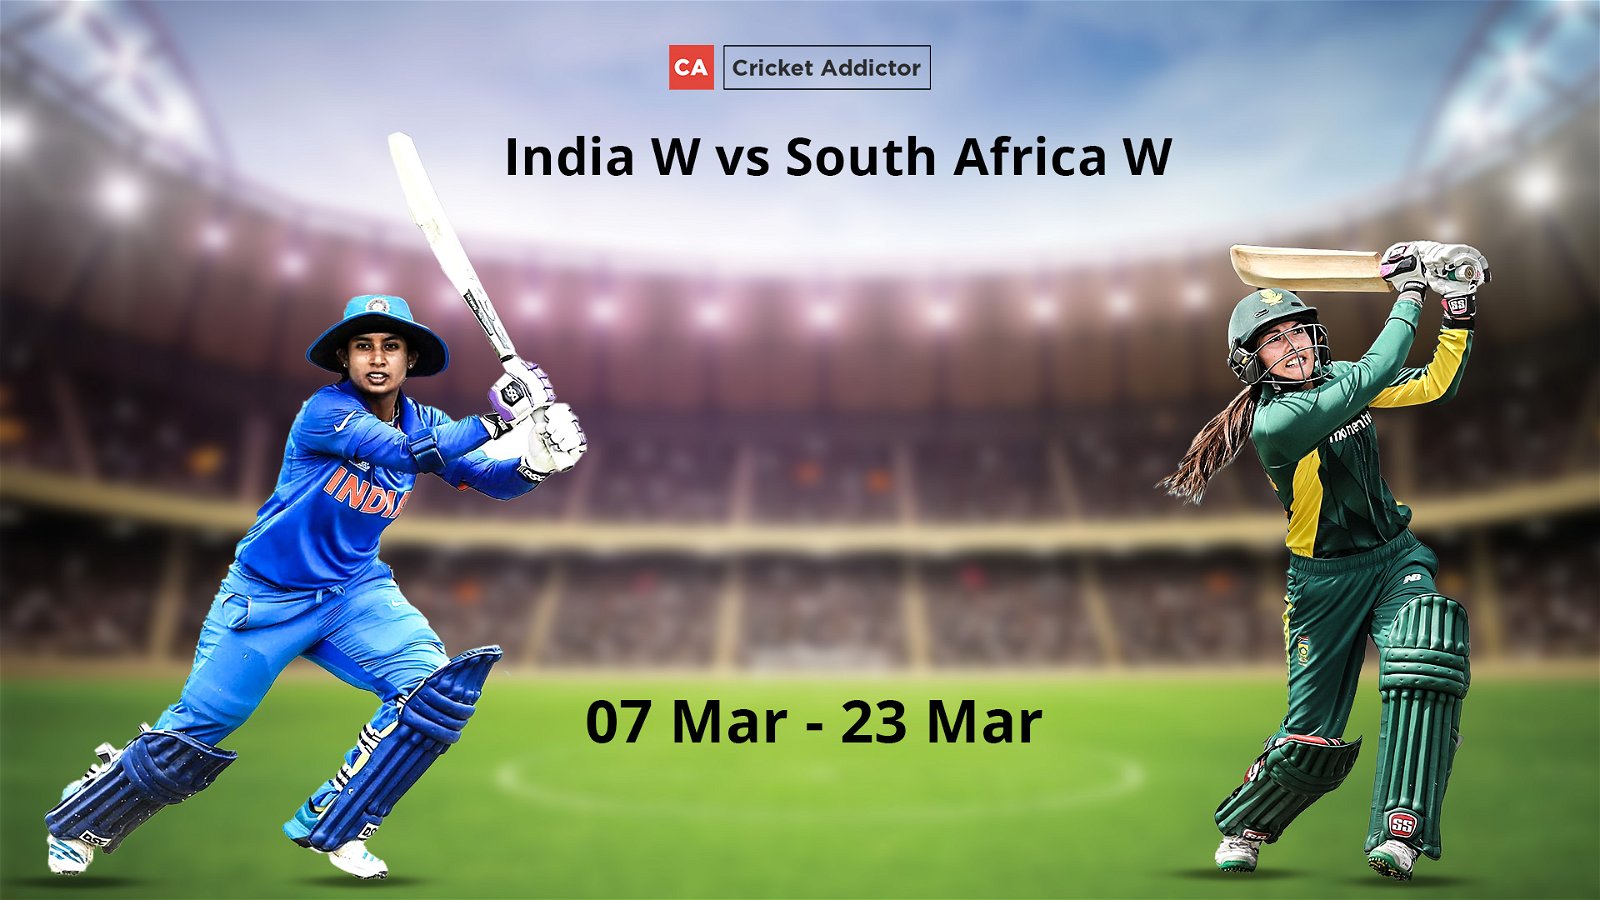 India Women vs South Africa Women 2021: Complete Schedule, Venues, Complete Squads, Live Streaming Details And Everything You Need To Know